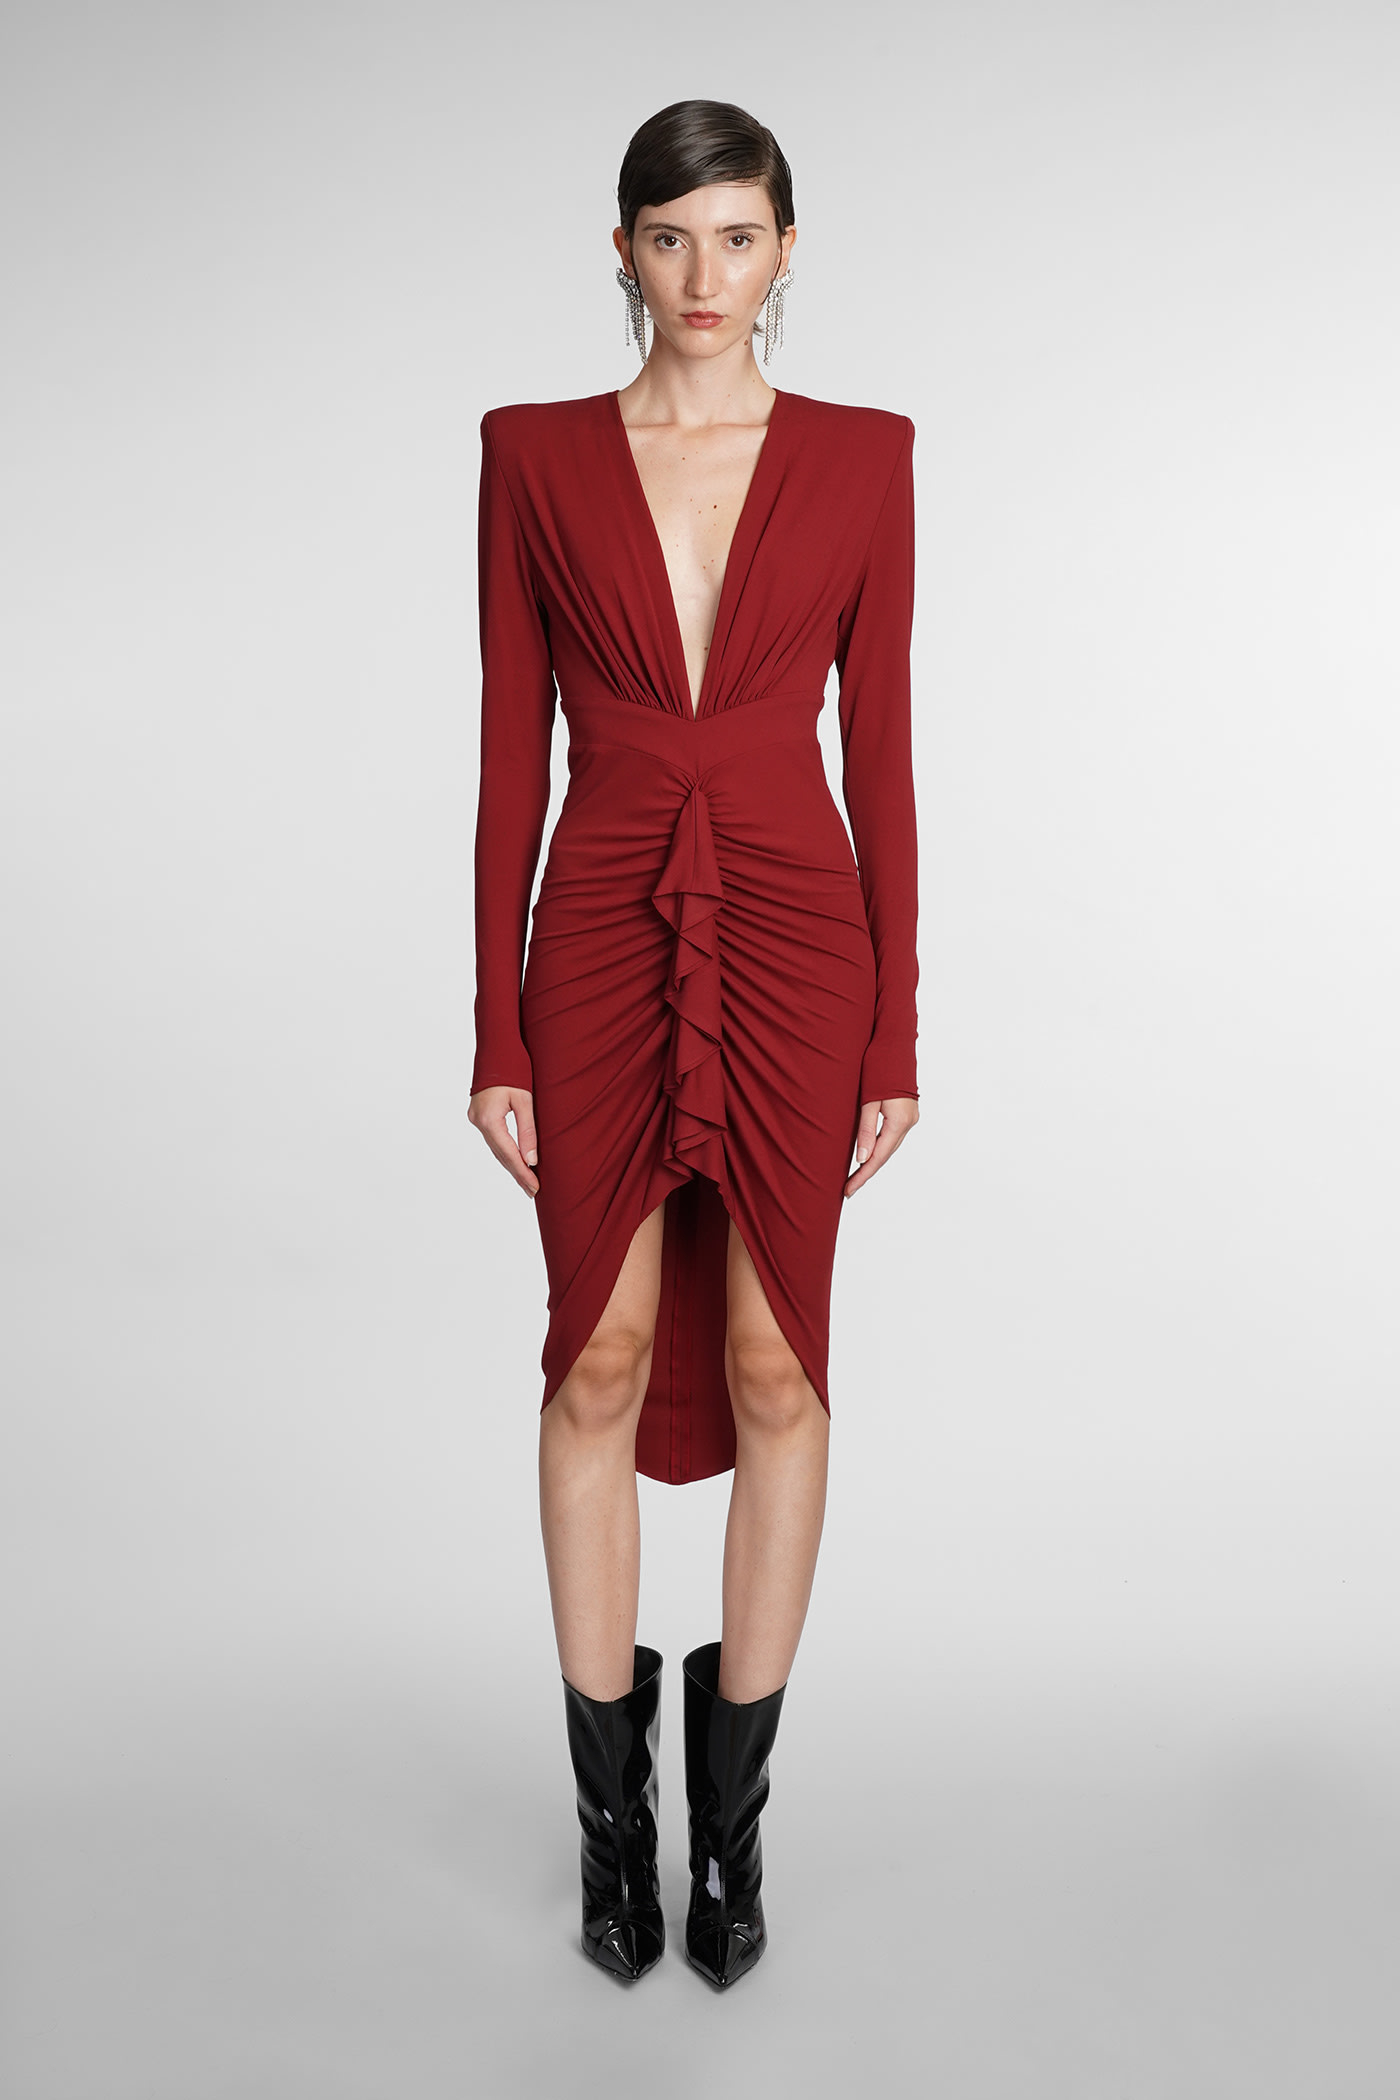 Alexandre Vauthier Dress In Red Viscose